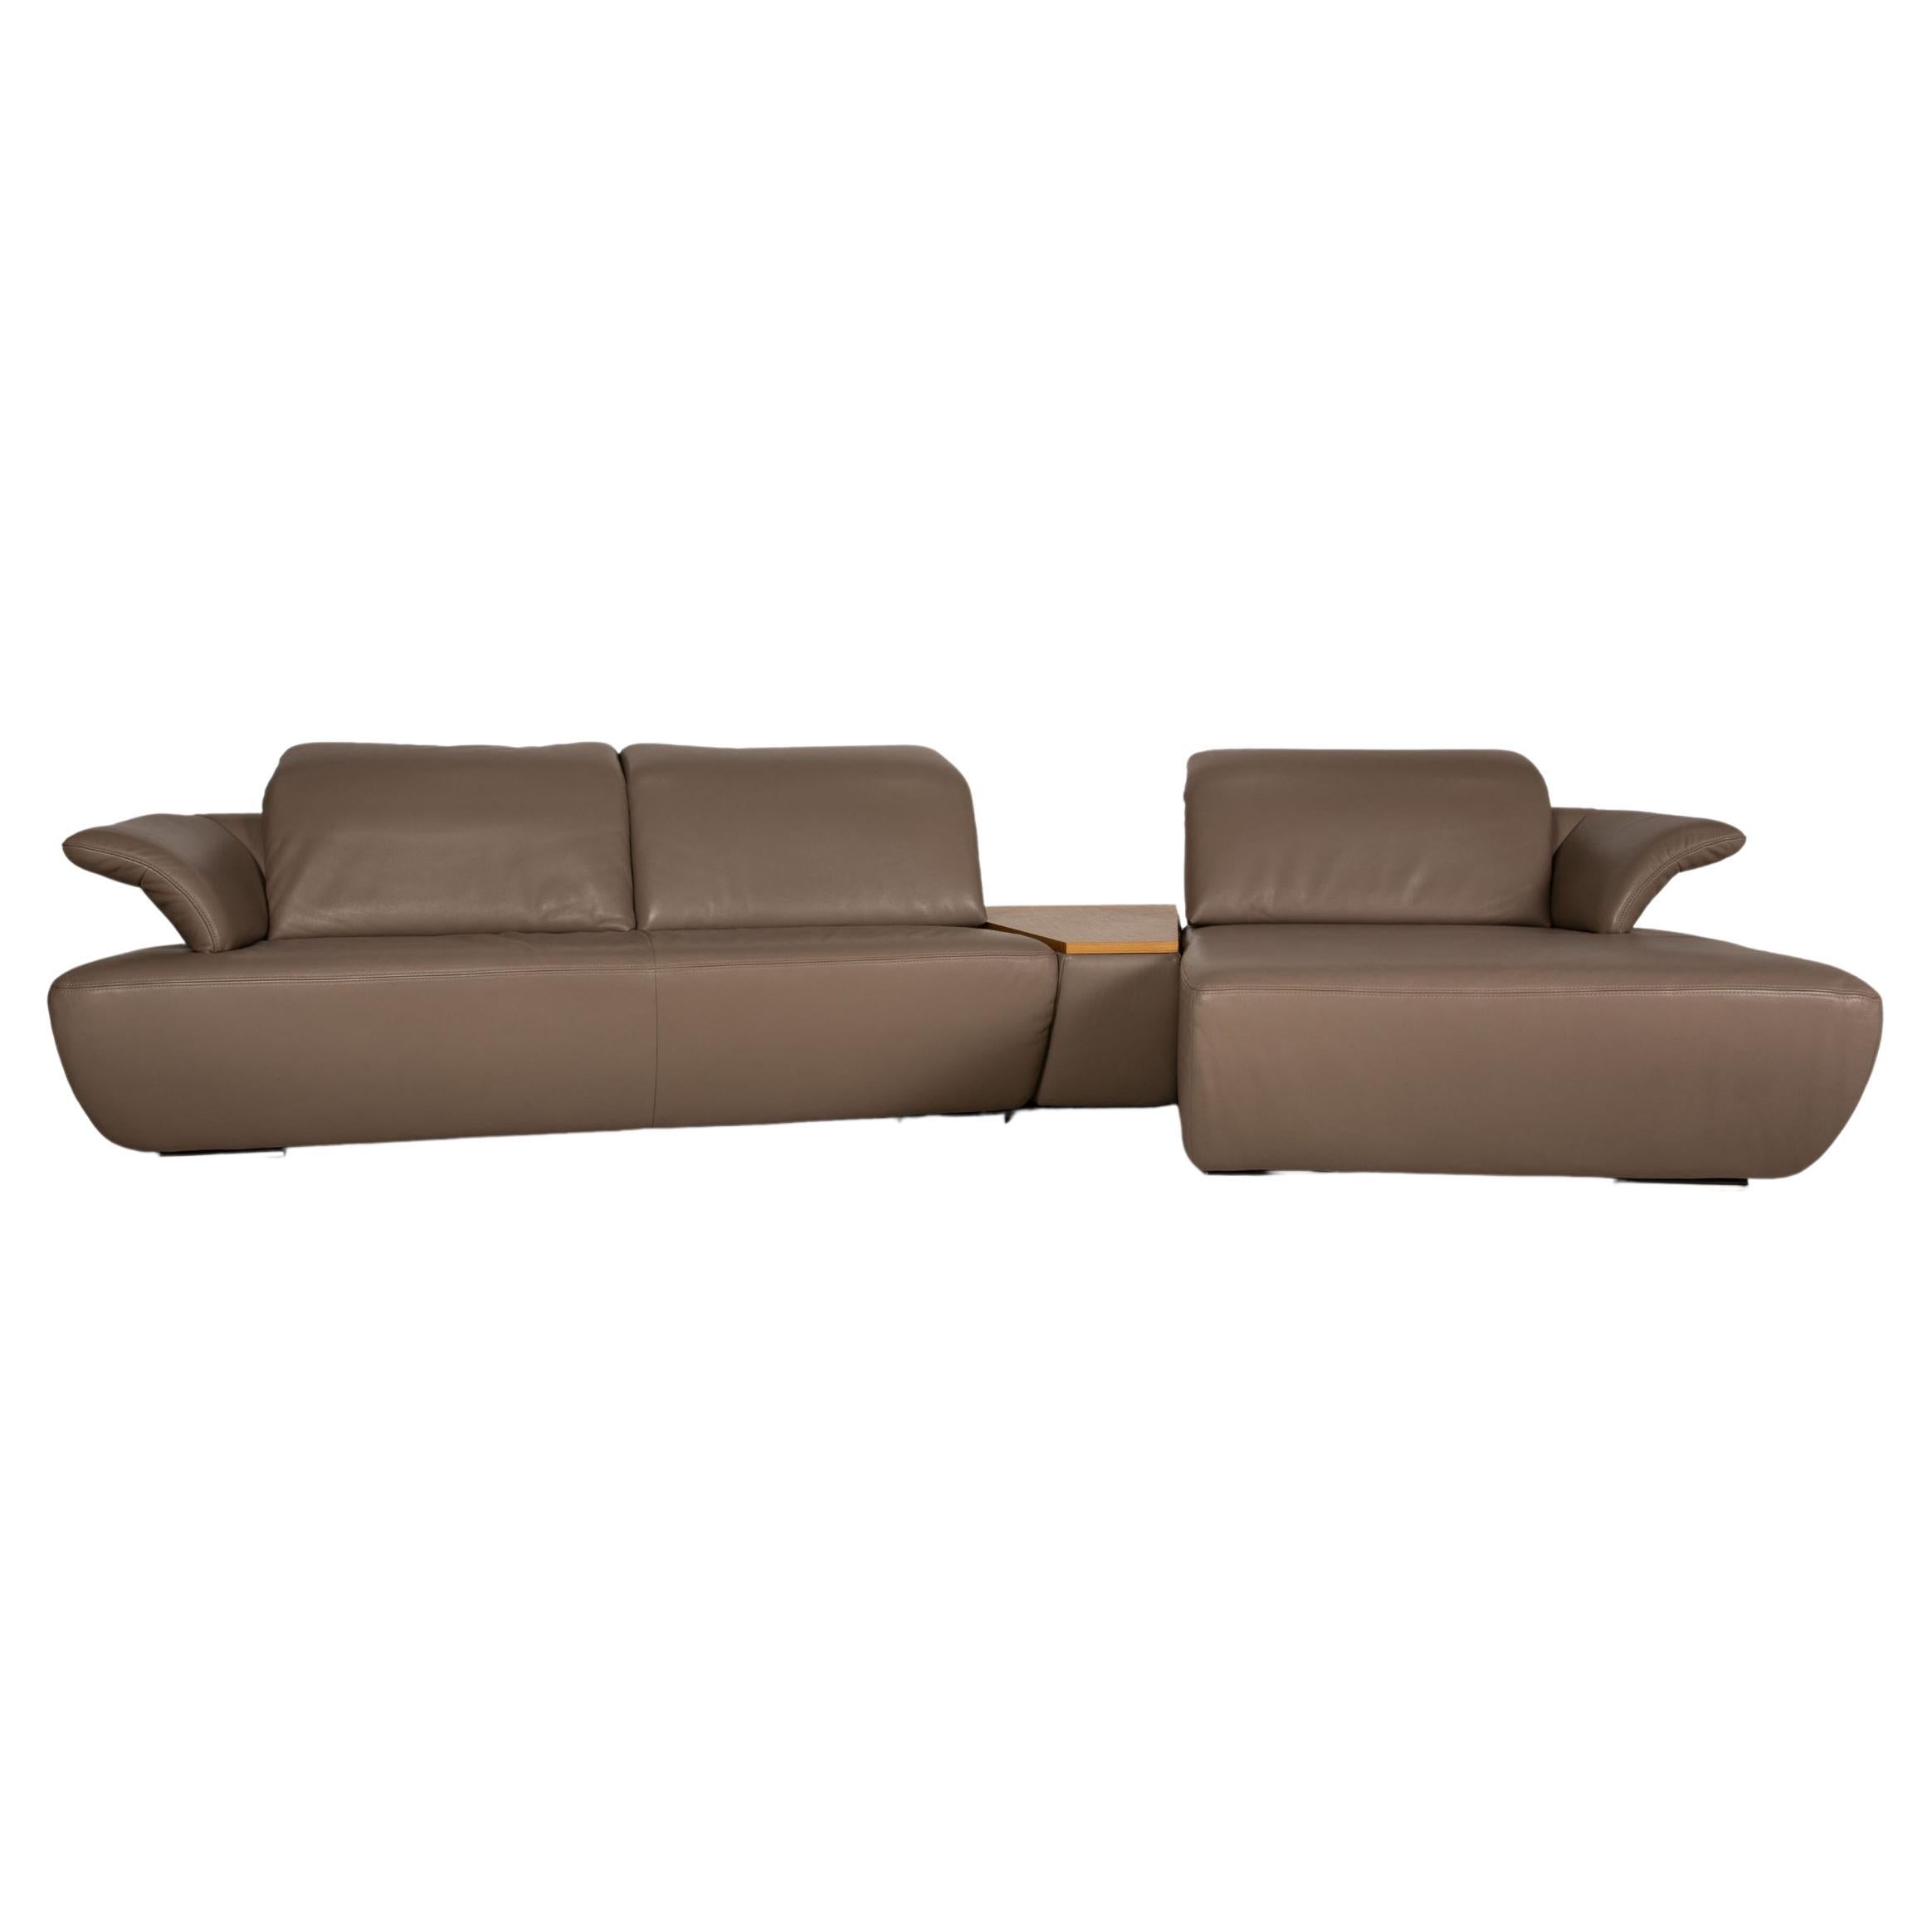 Koinor Avanti Leather Sofa Beige Corner Sofa Couch Function For Sale